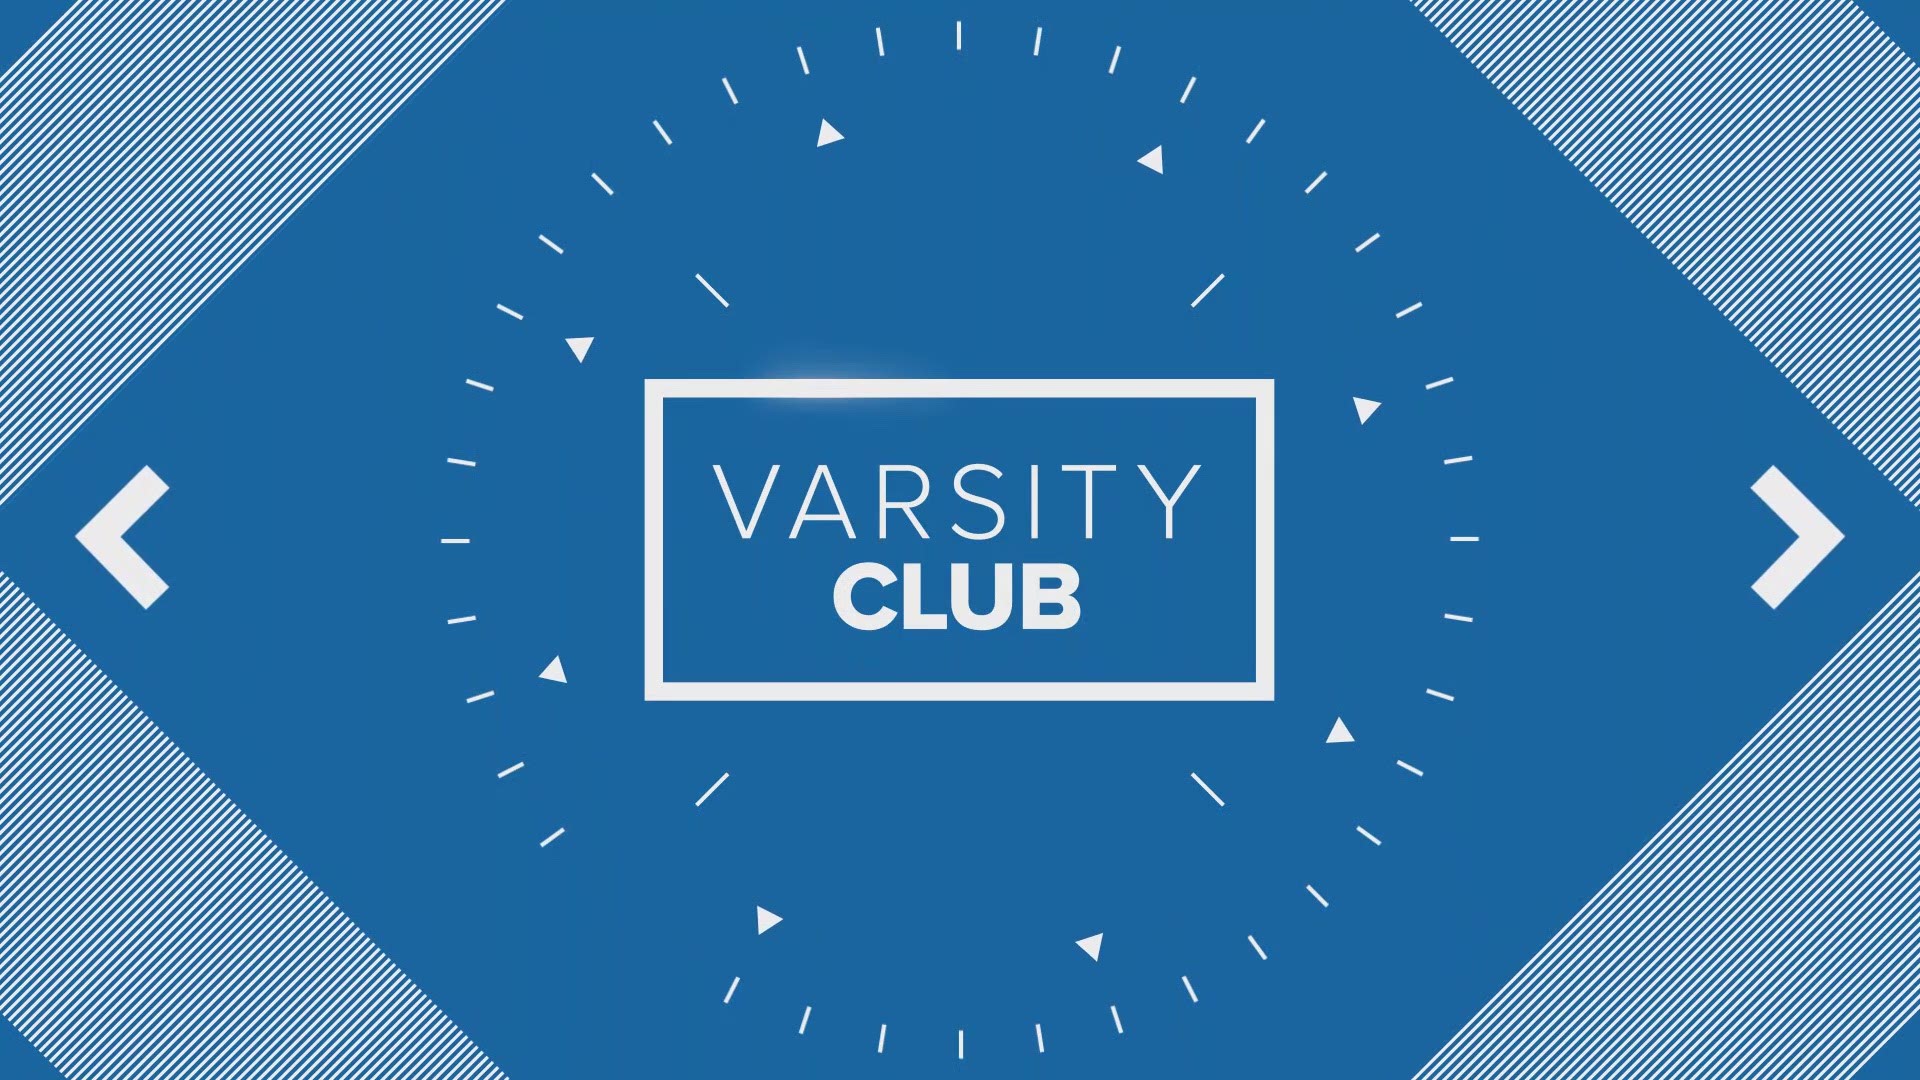 The Varsity Club has been on the air for almost four decades, and this week’s story connects the past with the future